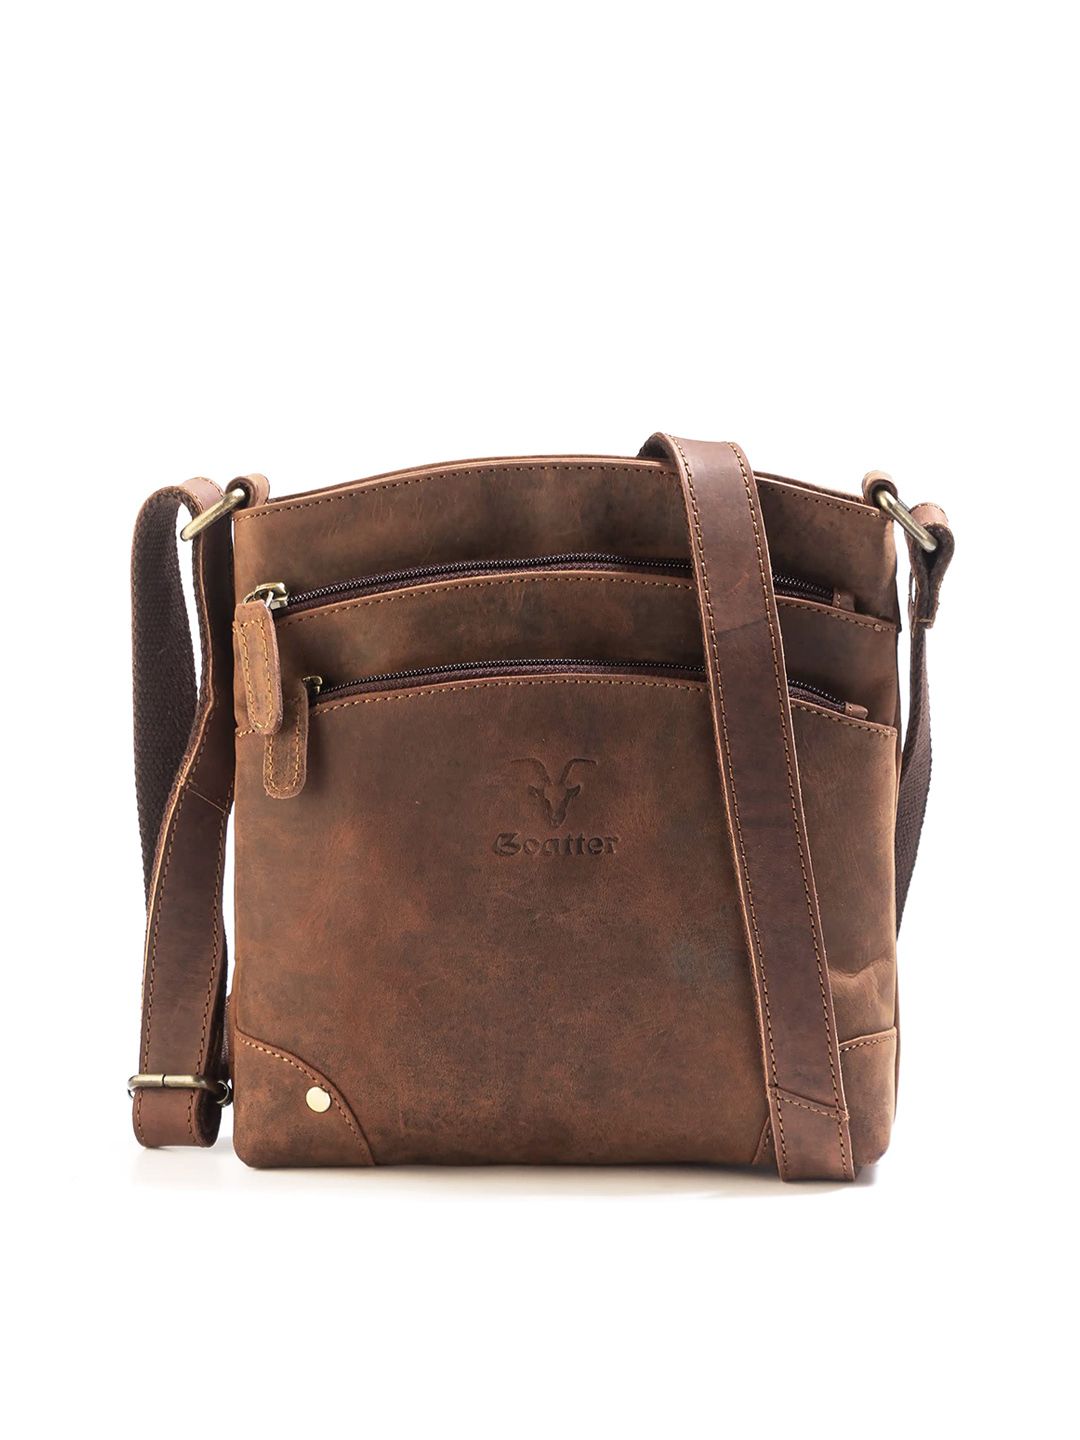 Goatter Brown Leather Structured Sling Bag Price in India